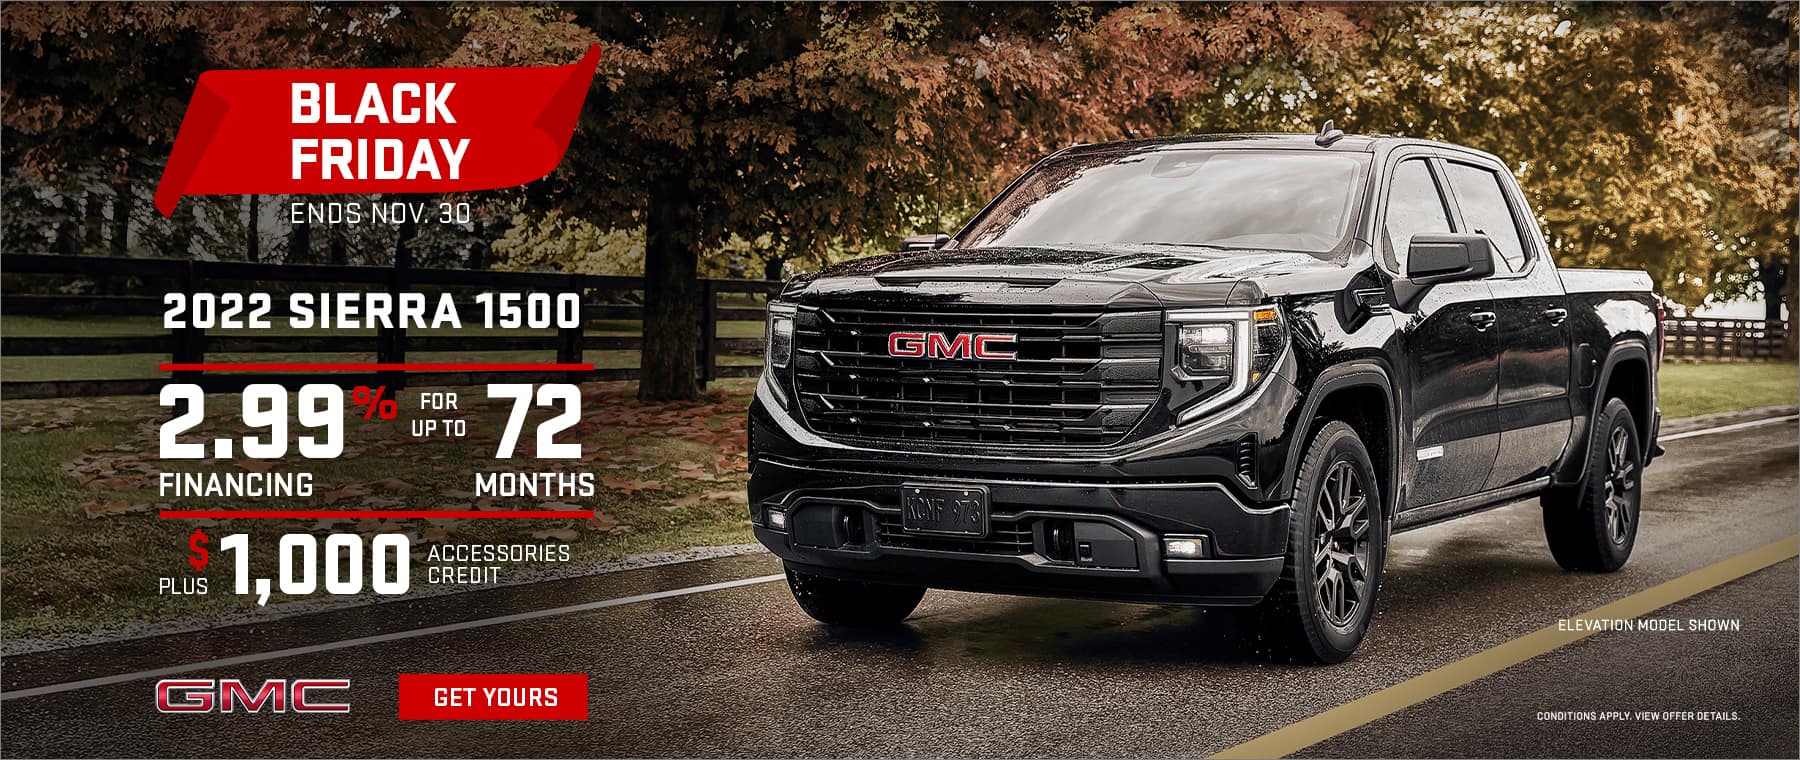 2.99% financing for up to 72 months + $1,000 accessories credit with purchase of 2022 Sierra 1500